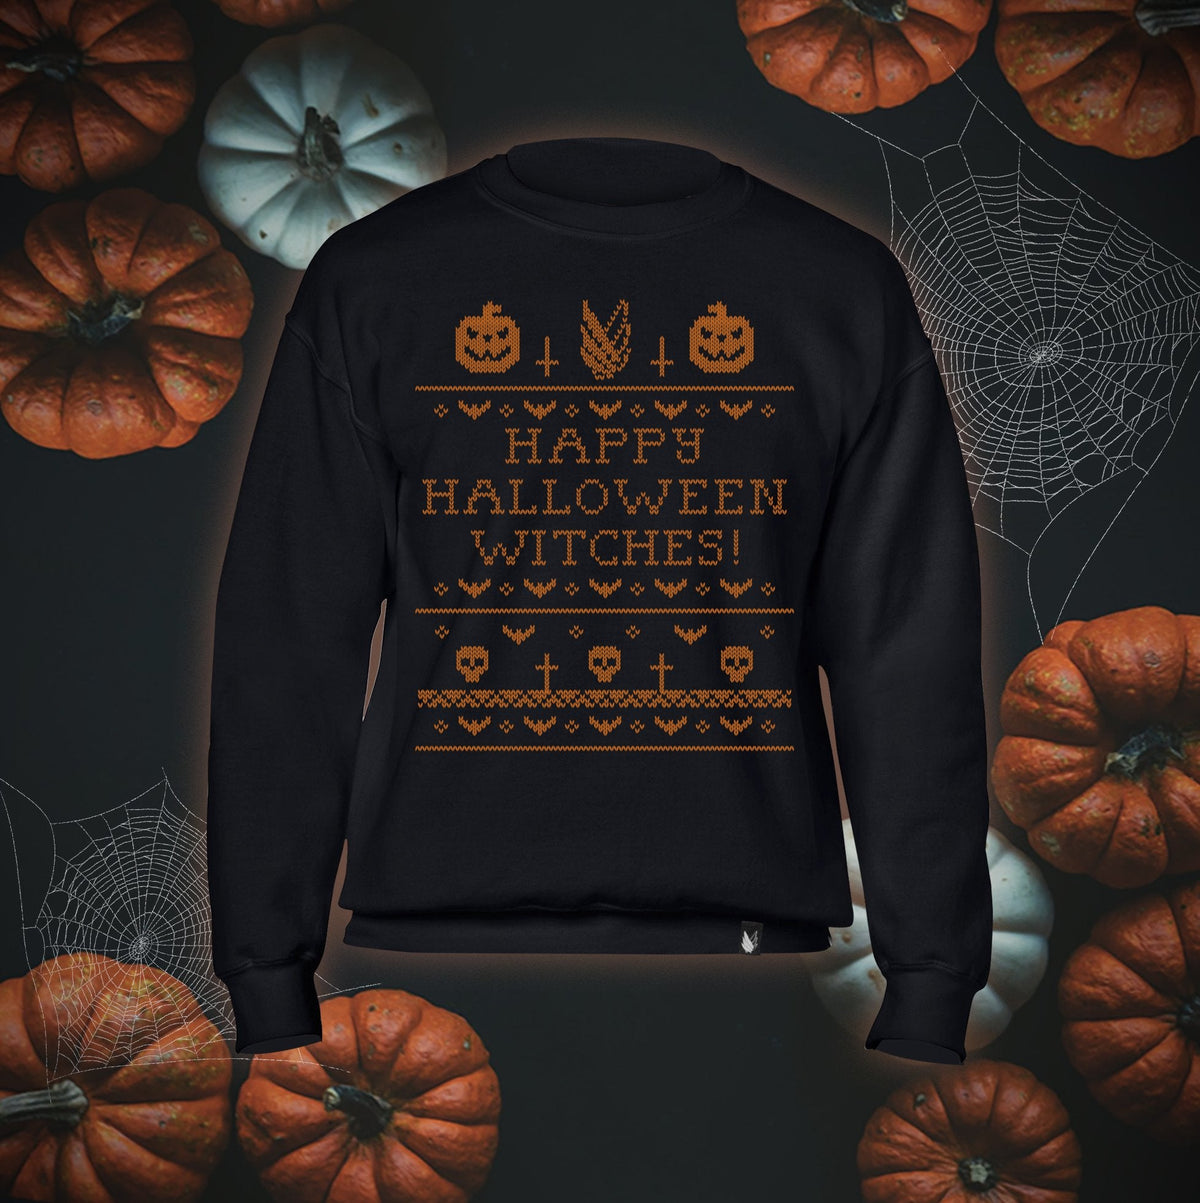 Happy Halloween witches - Sudadera - Stockholm Co. - Sudadera - halloween, otros, sudadera, unisex